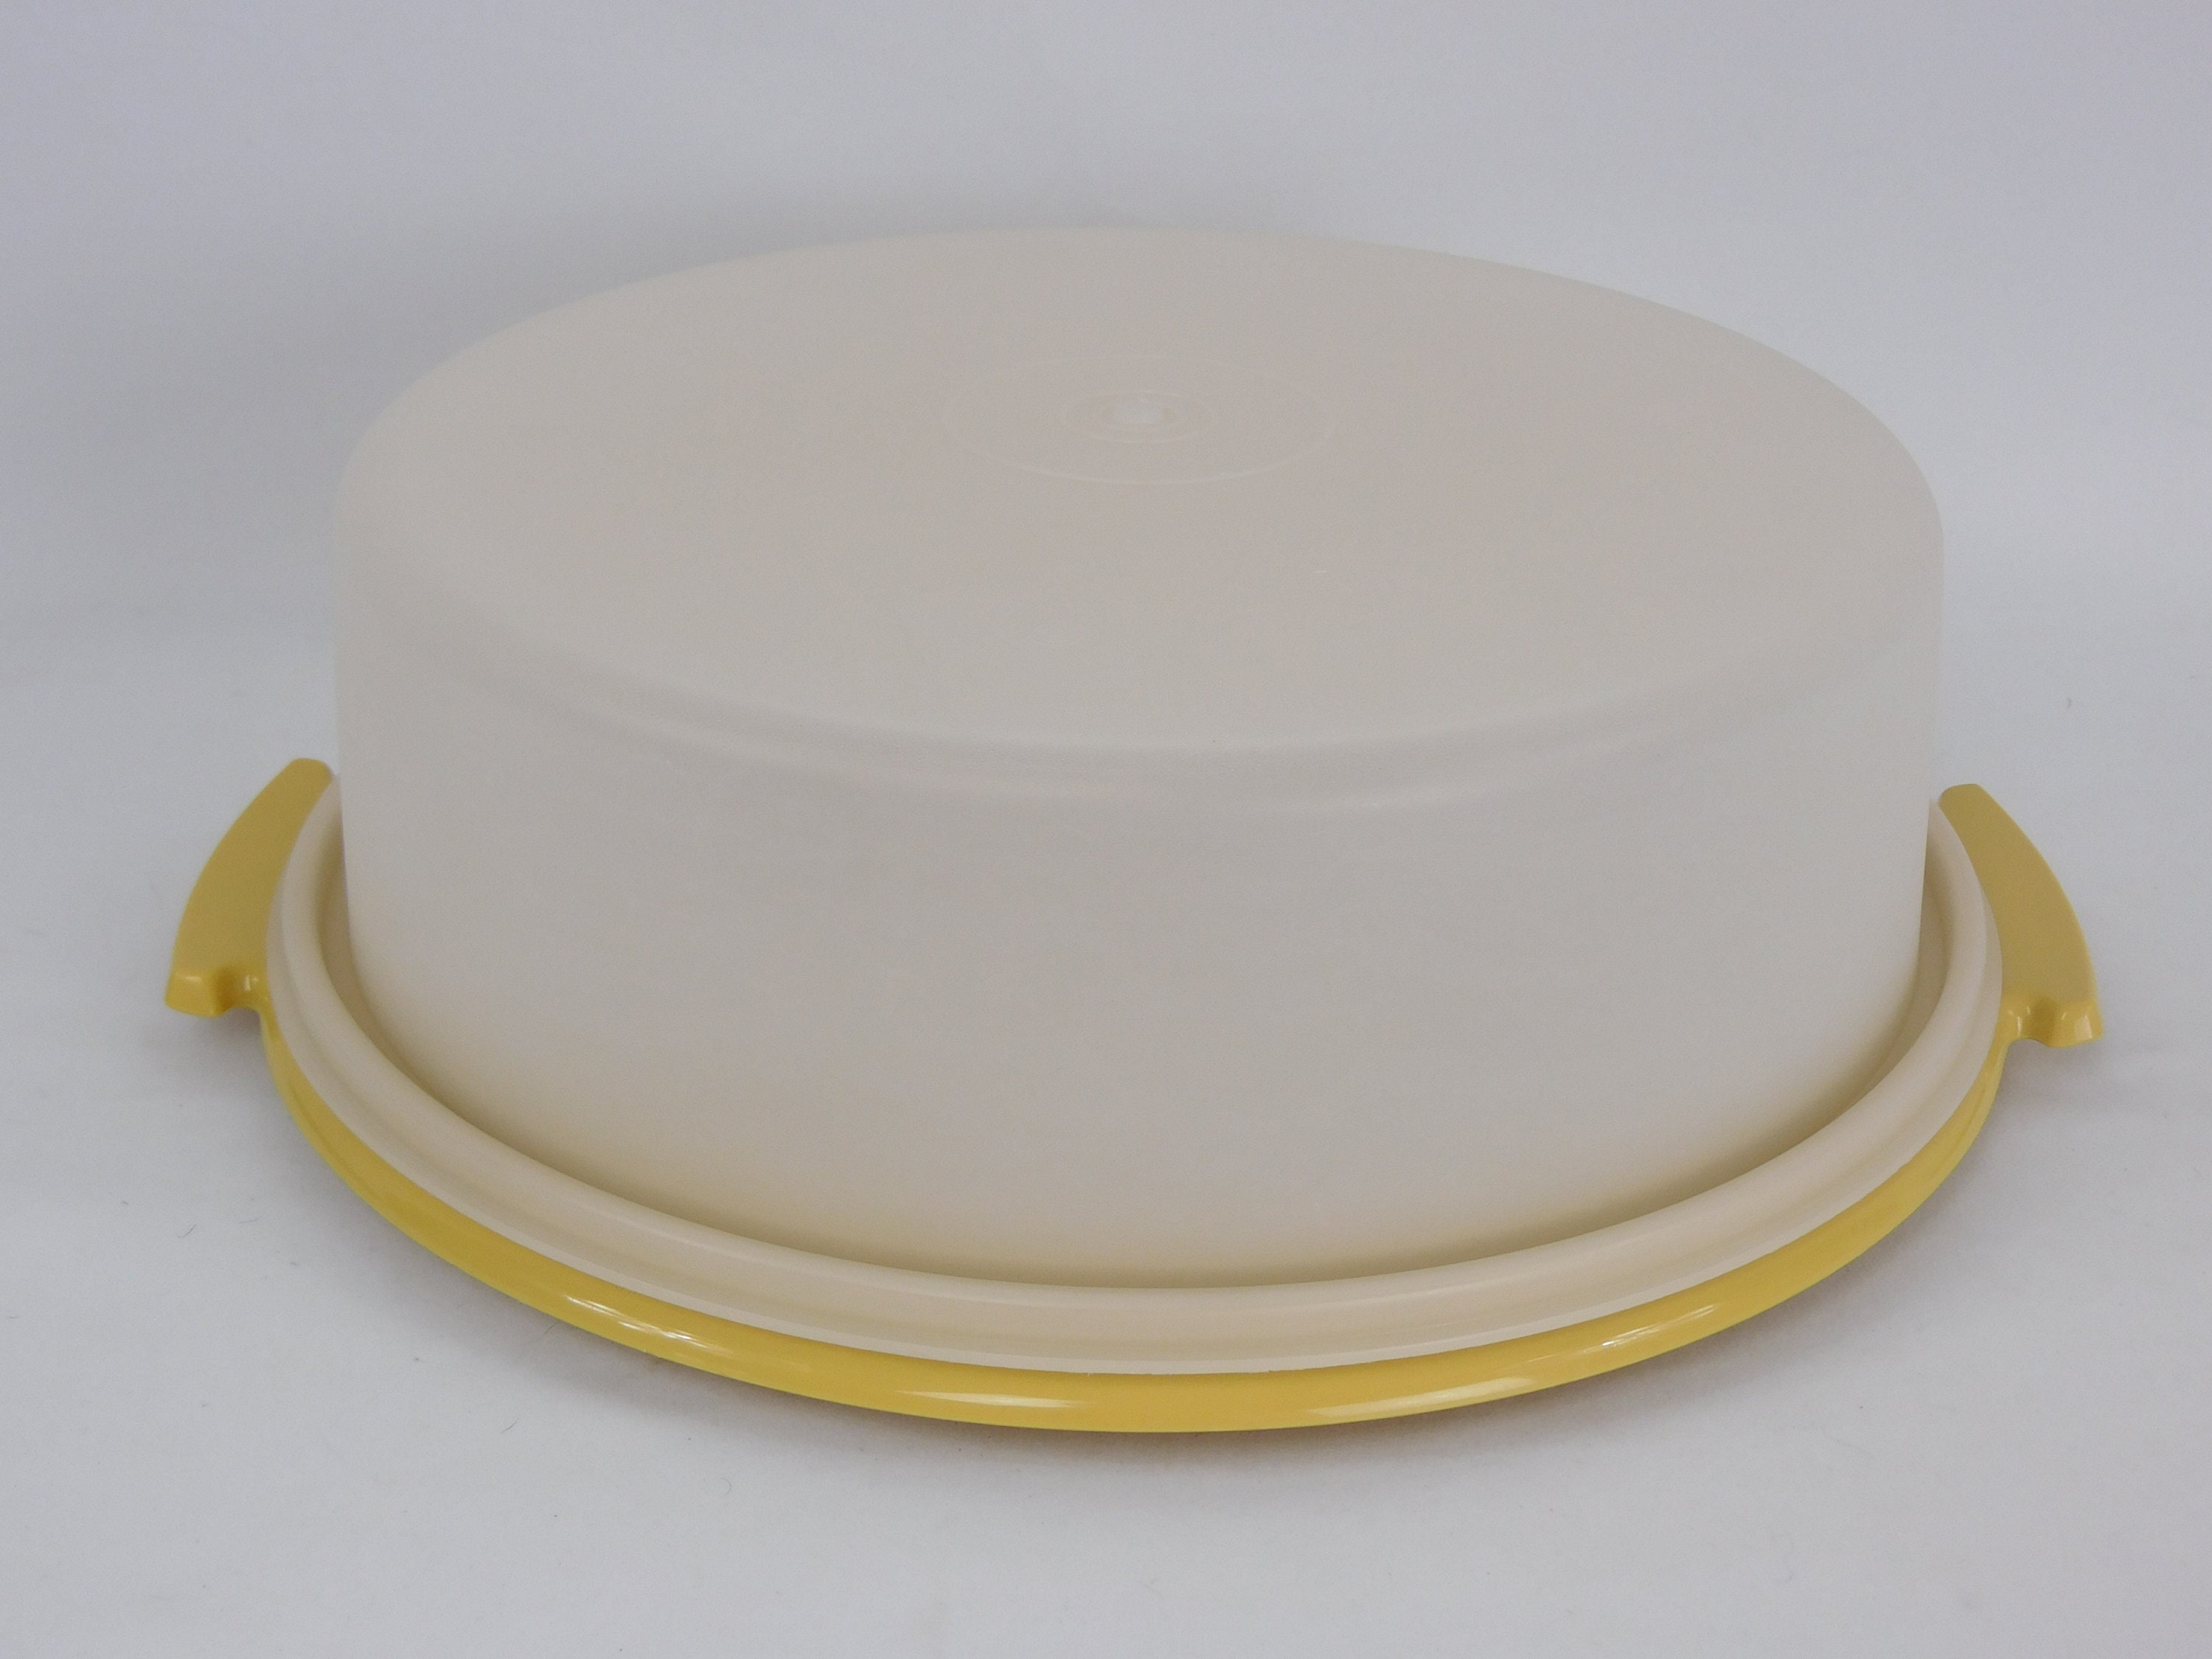 Vintage Tupperware Pie Keeper Taker Carrier #719 White 2 Pieces